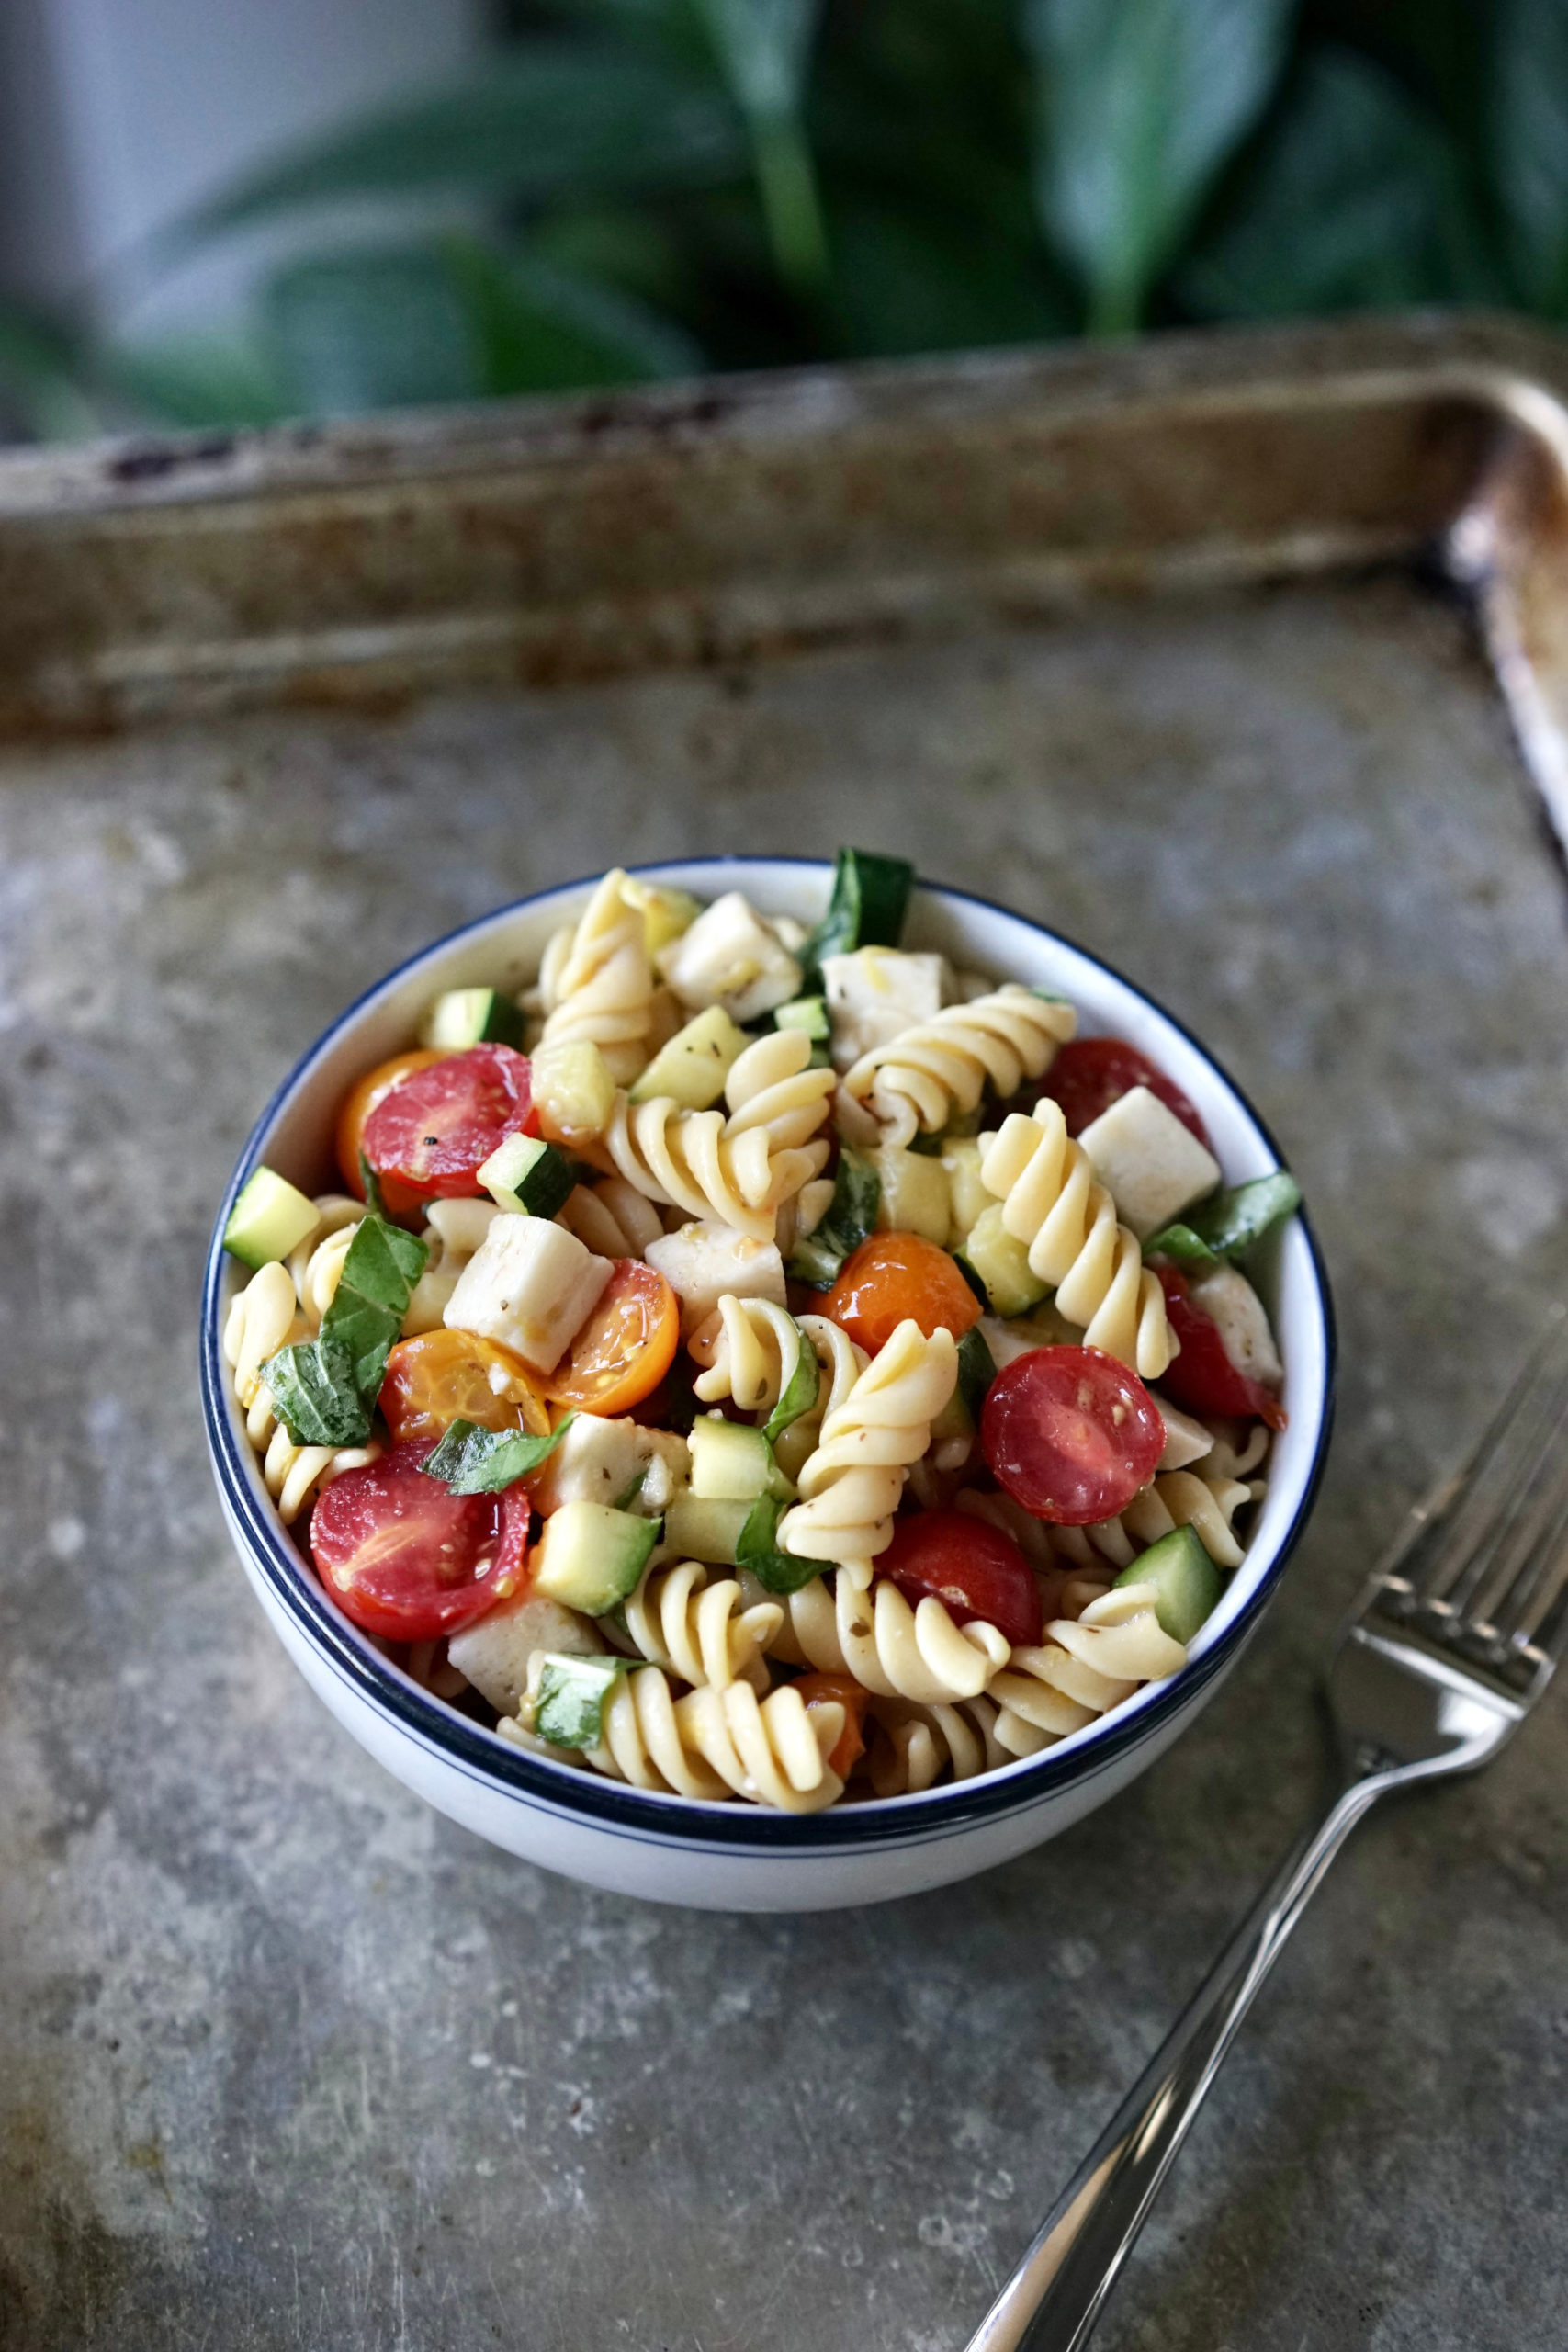 Lemony Vegan Pasta Salad with Tomatoes & Zucchini | Living Healthy in Seattle